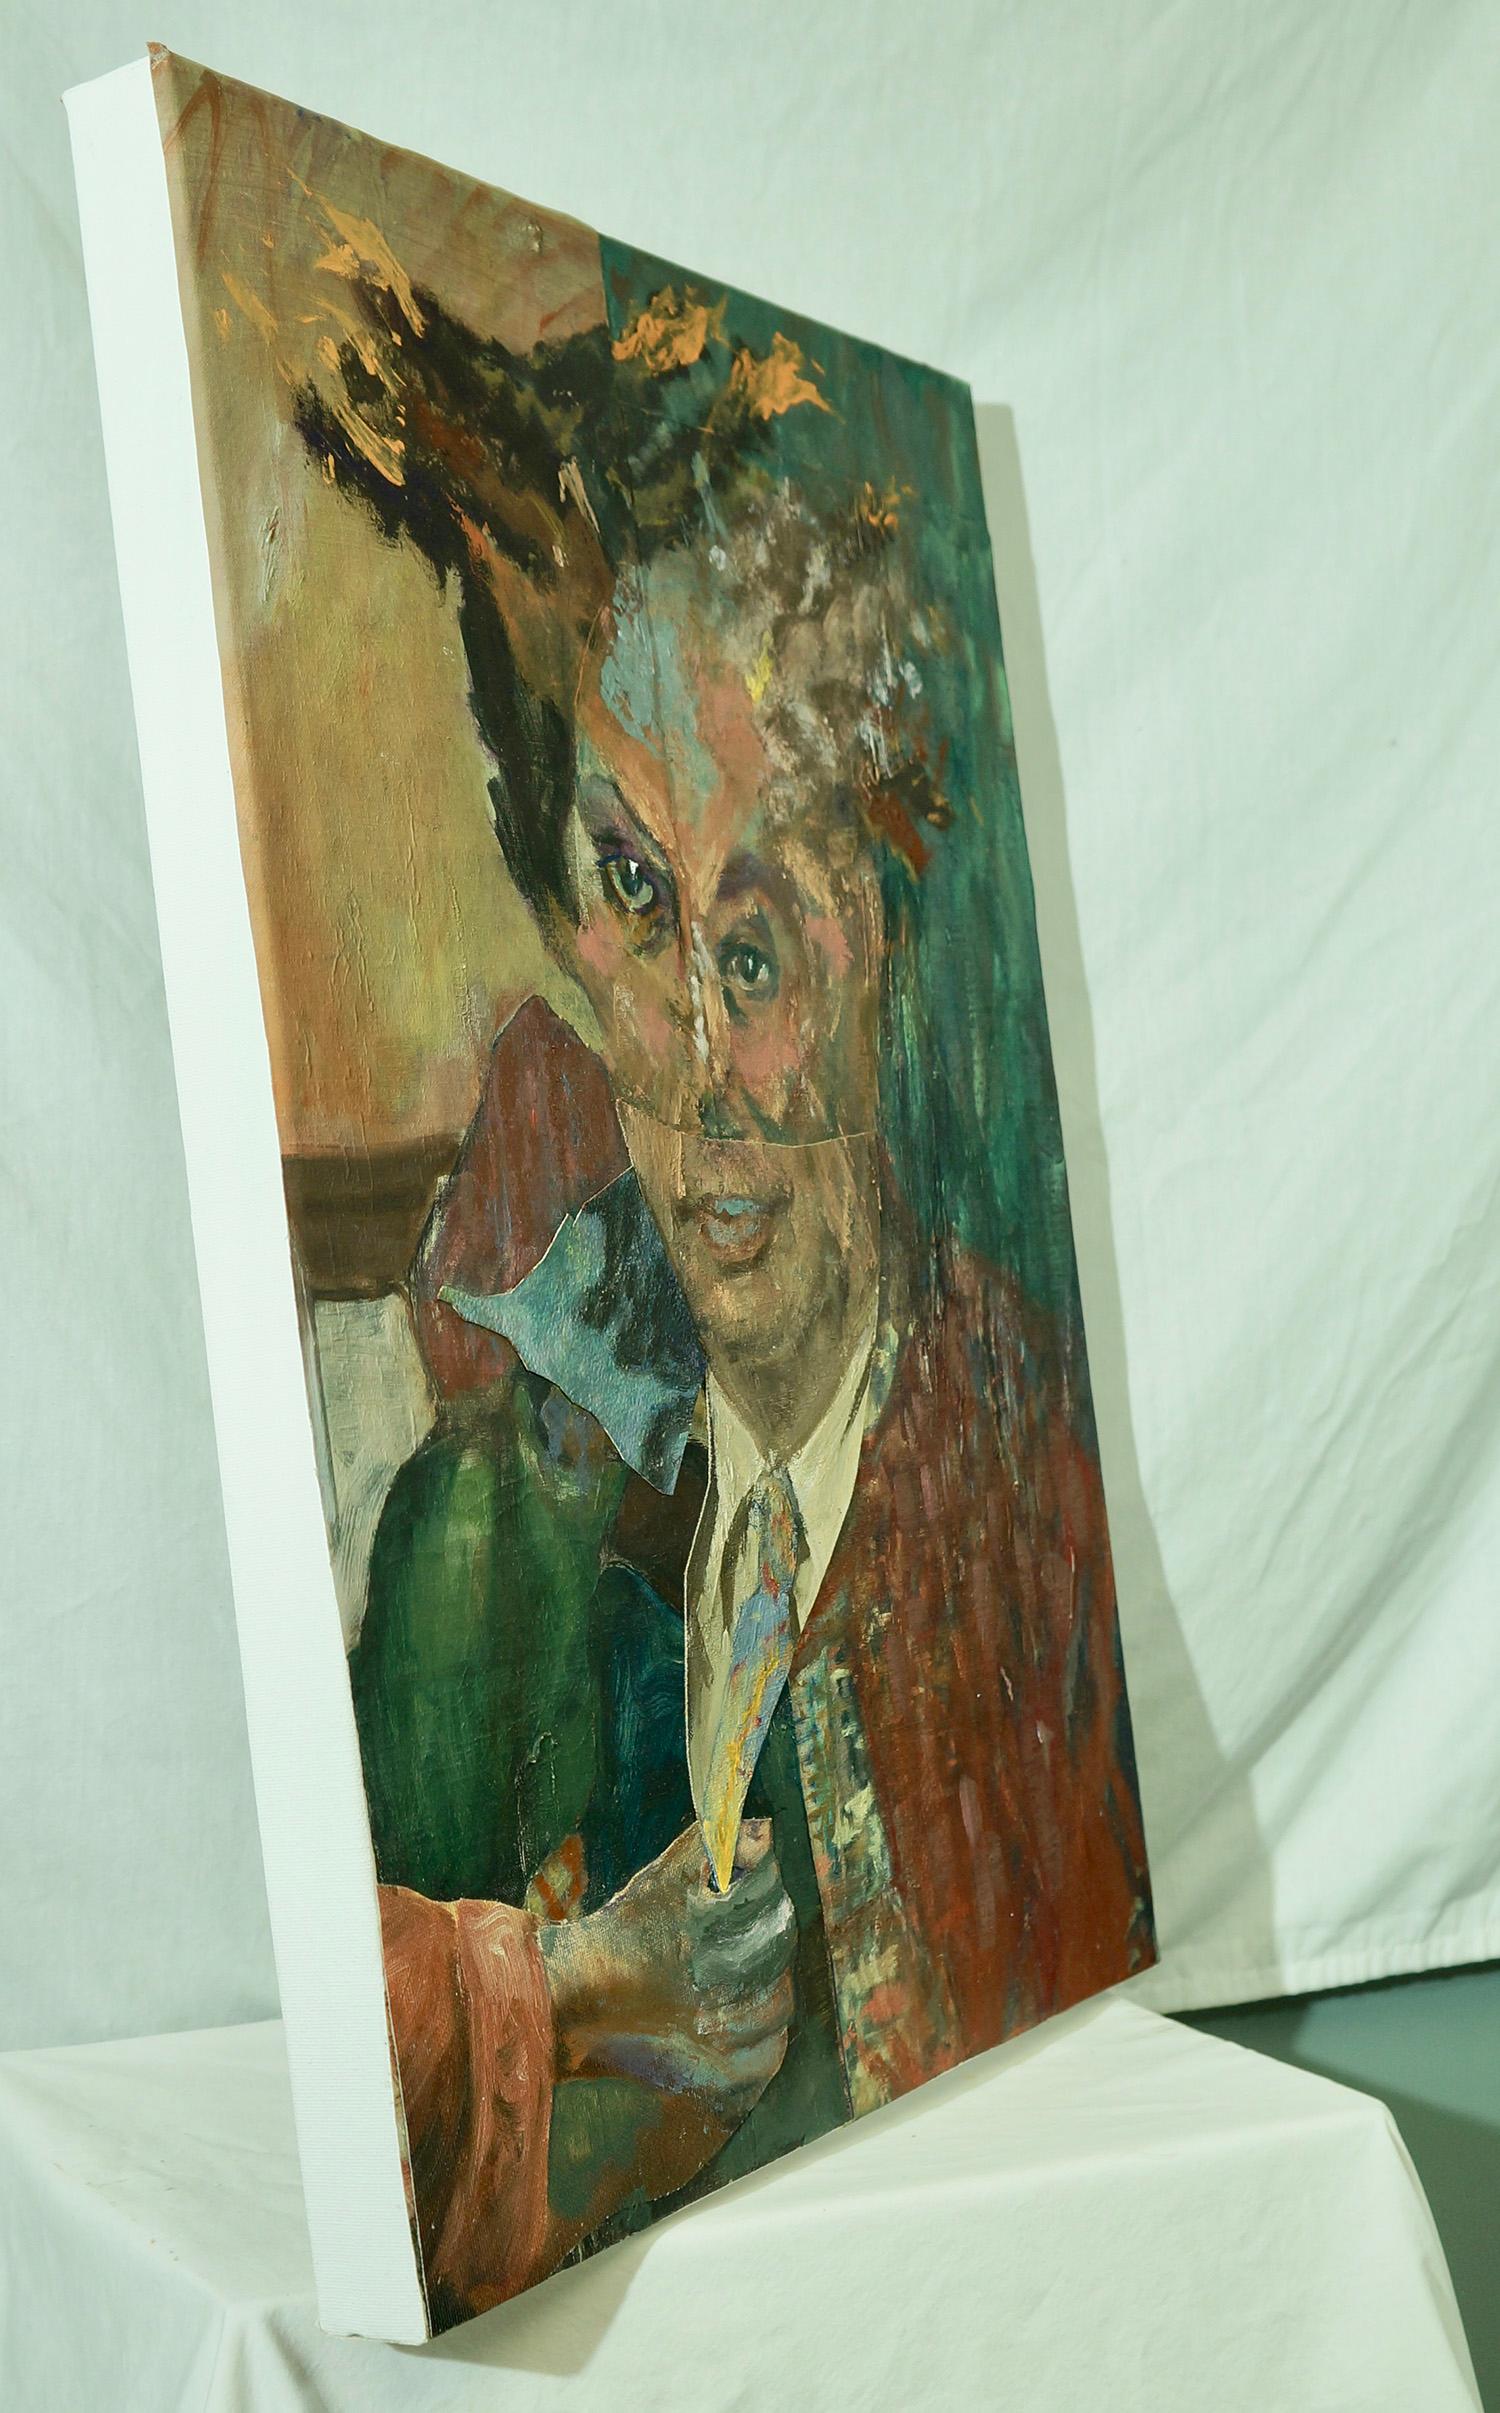 John Baker’s “Man Adjusting his Tie” is an acrylic painting on canvas 24 x 18 inches in greens and reds with blue and yellow color accents. The disheveled appearance of the man implies a certain fragmentation of self, or at least a certain lack of